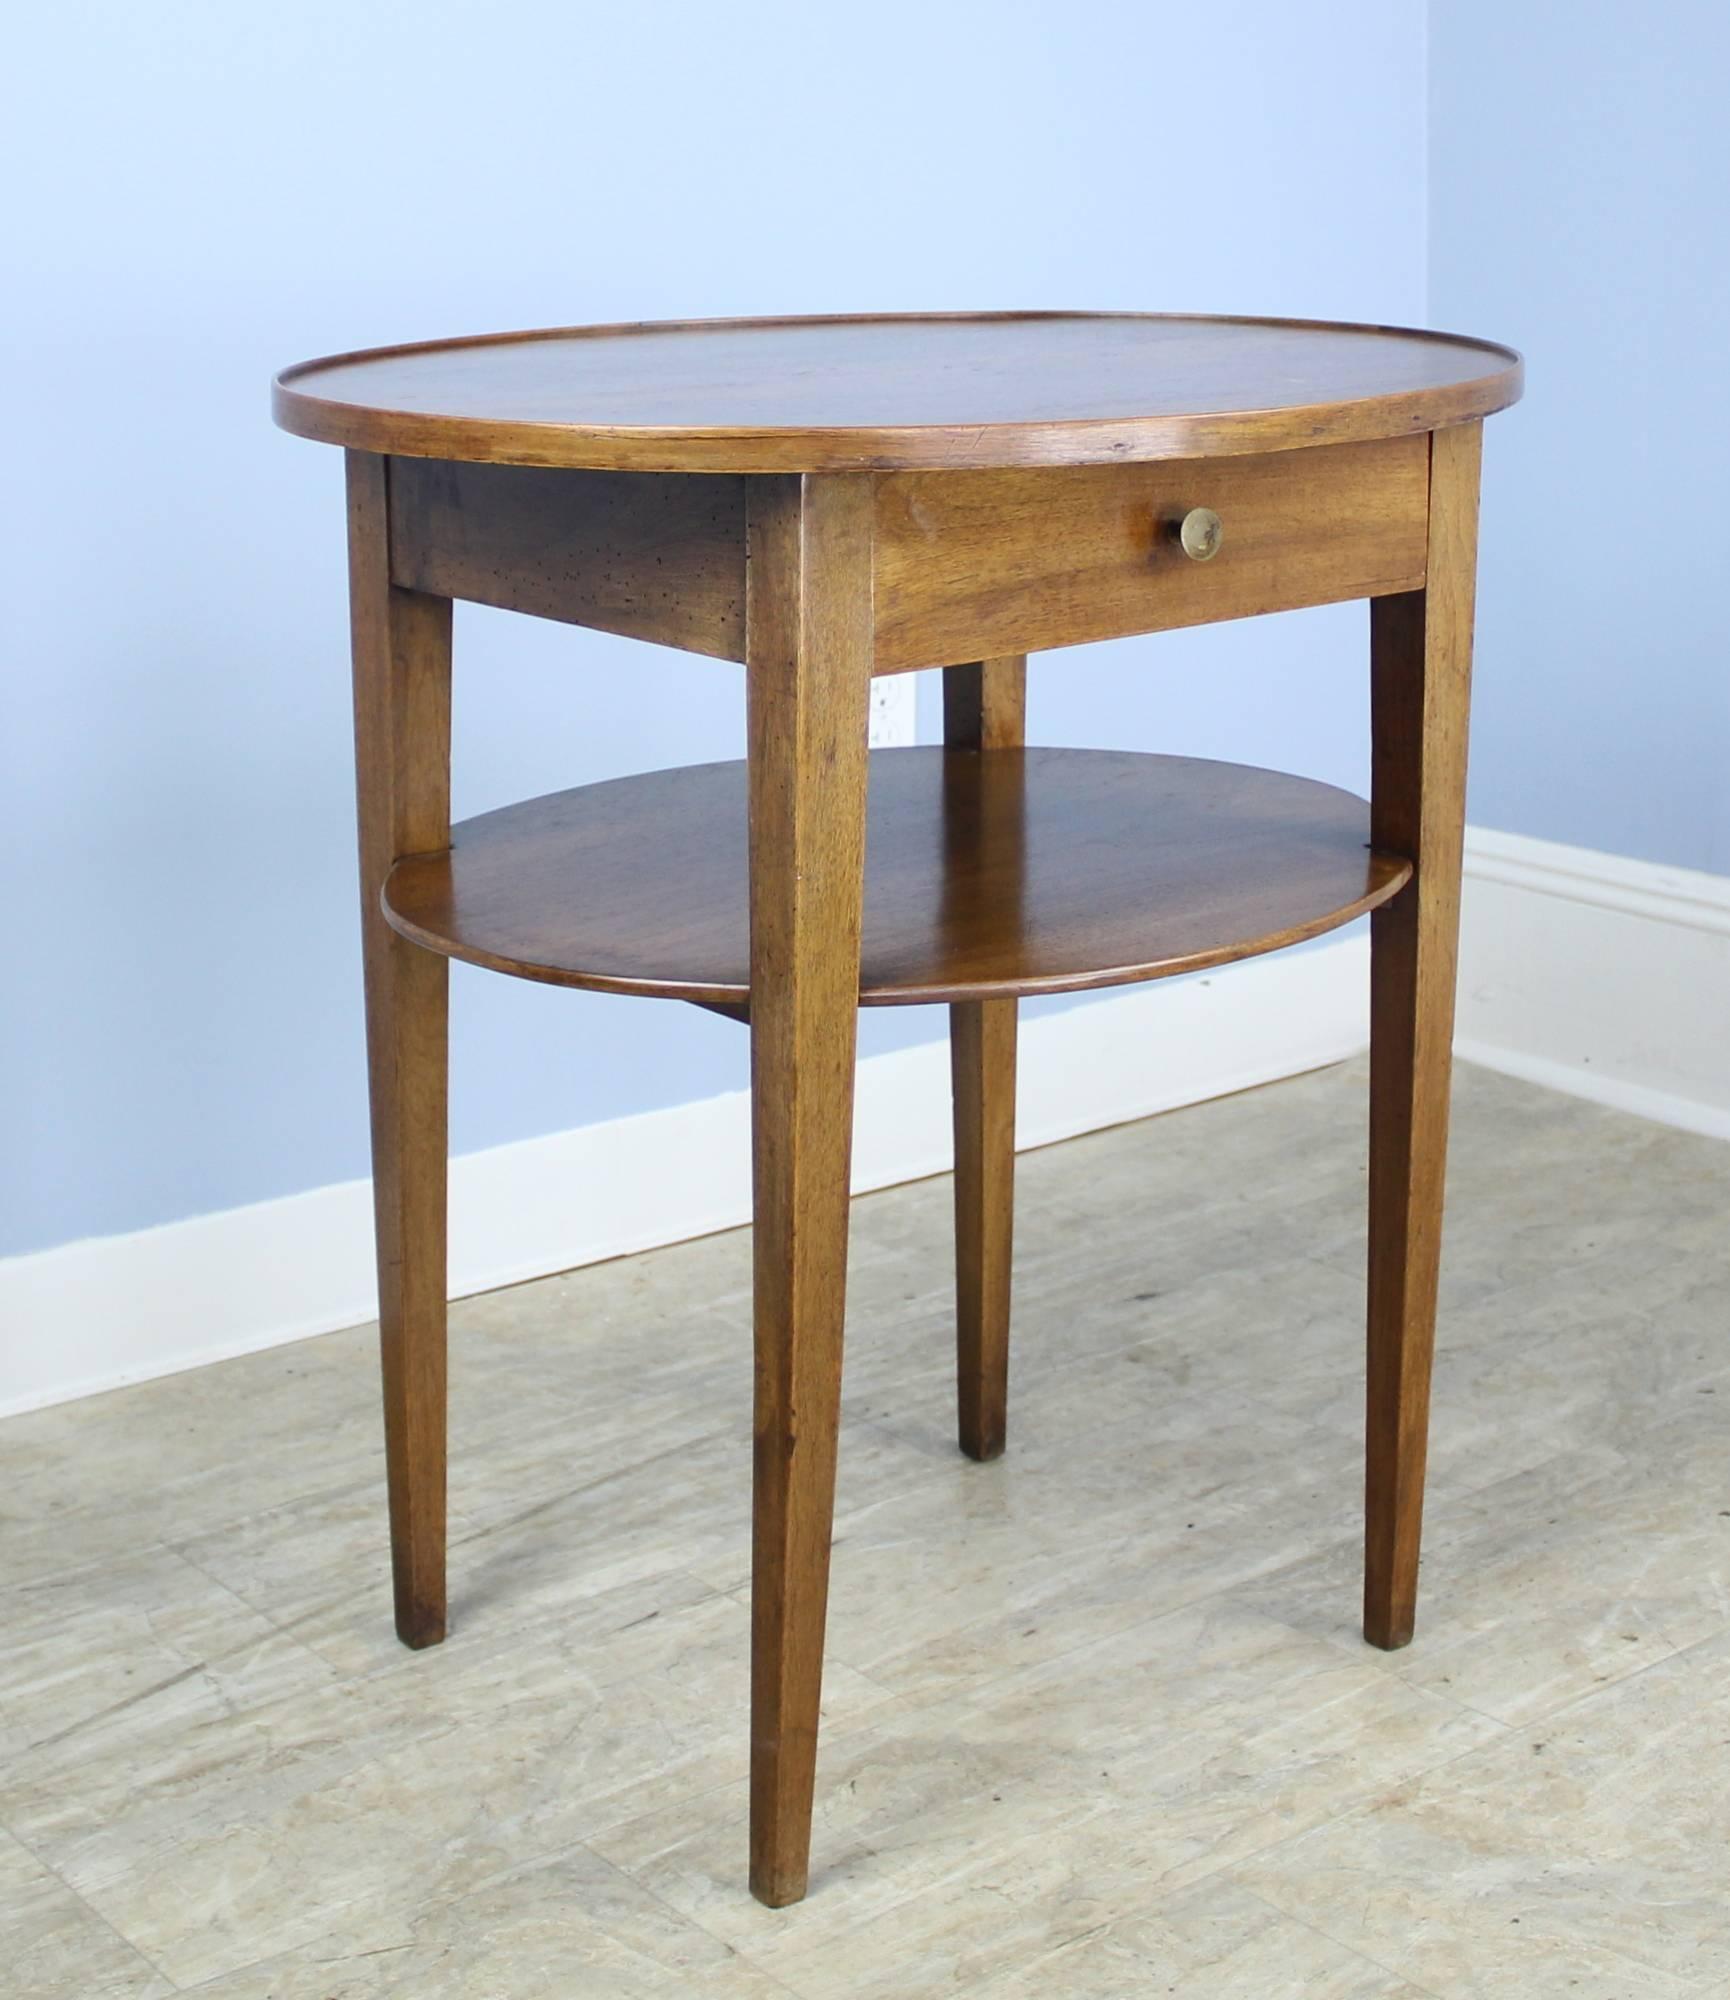 An elegant oval walnut side table with an unusual lower shelf. Single drawer, tapered legs, and a small galleried edge complete the look.